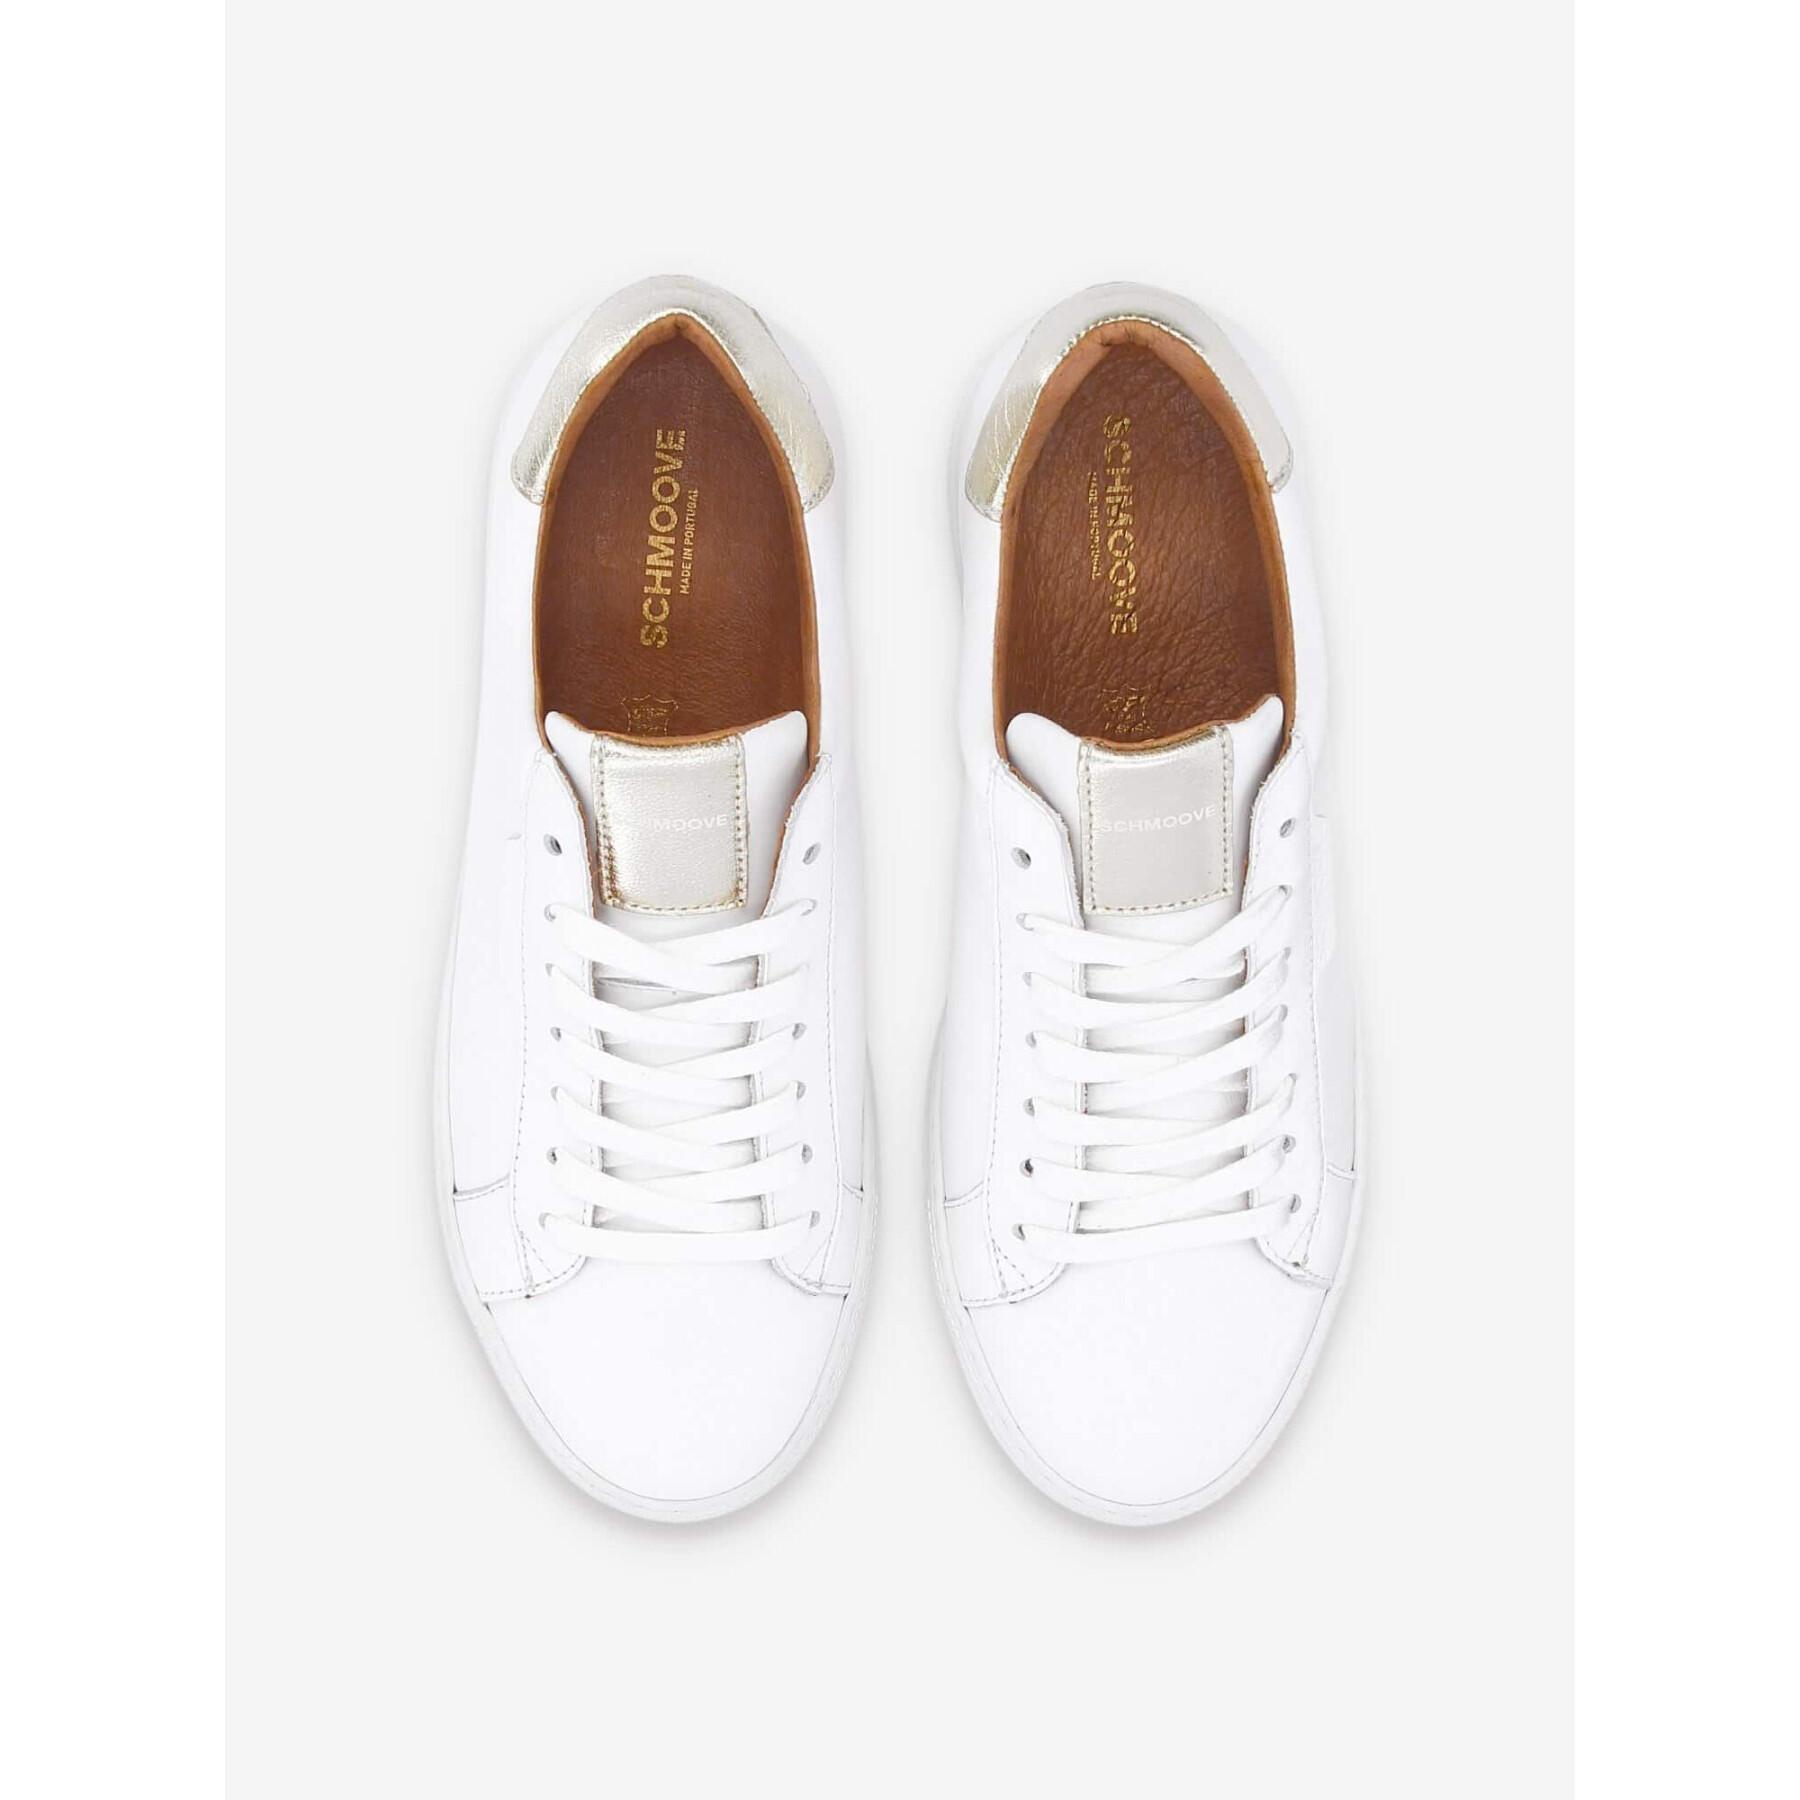 Sneakers Schmoove femme Spark Clay